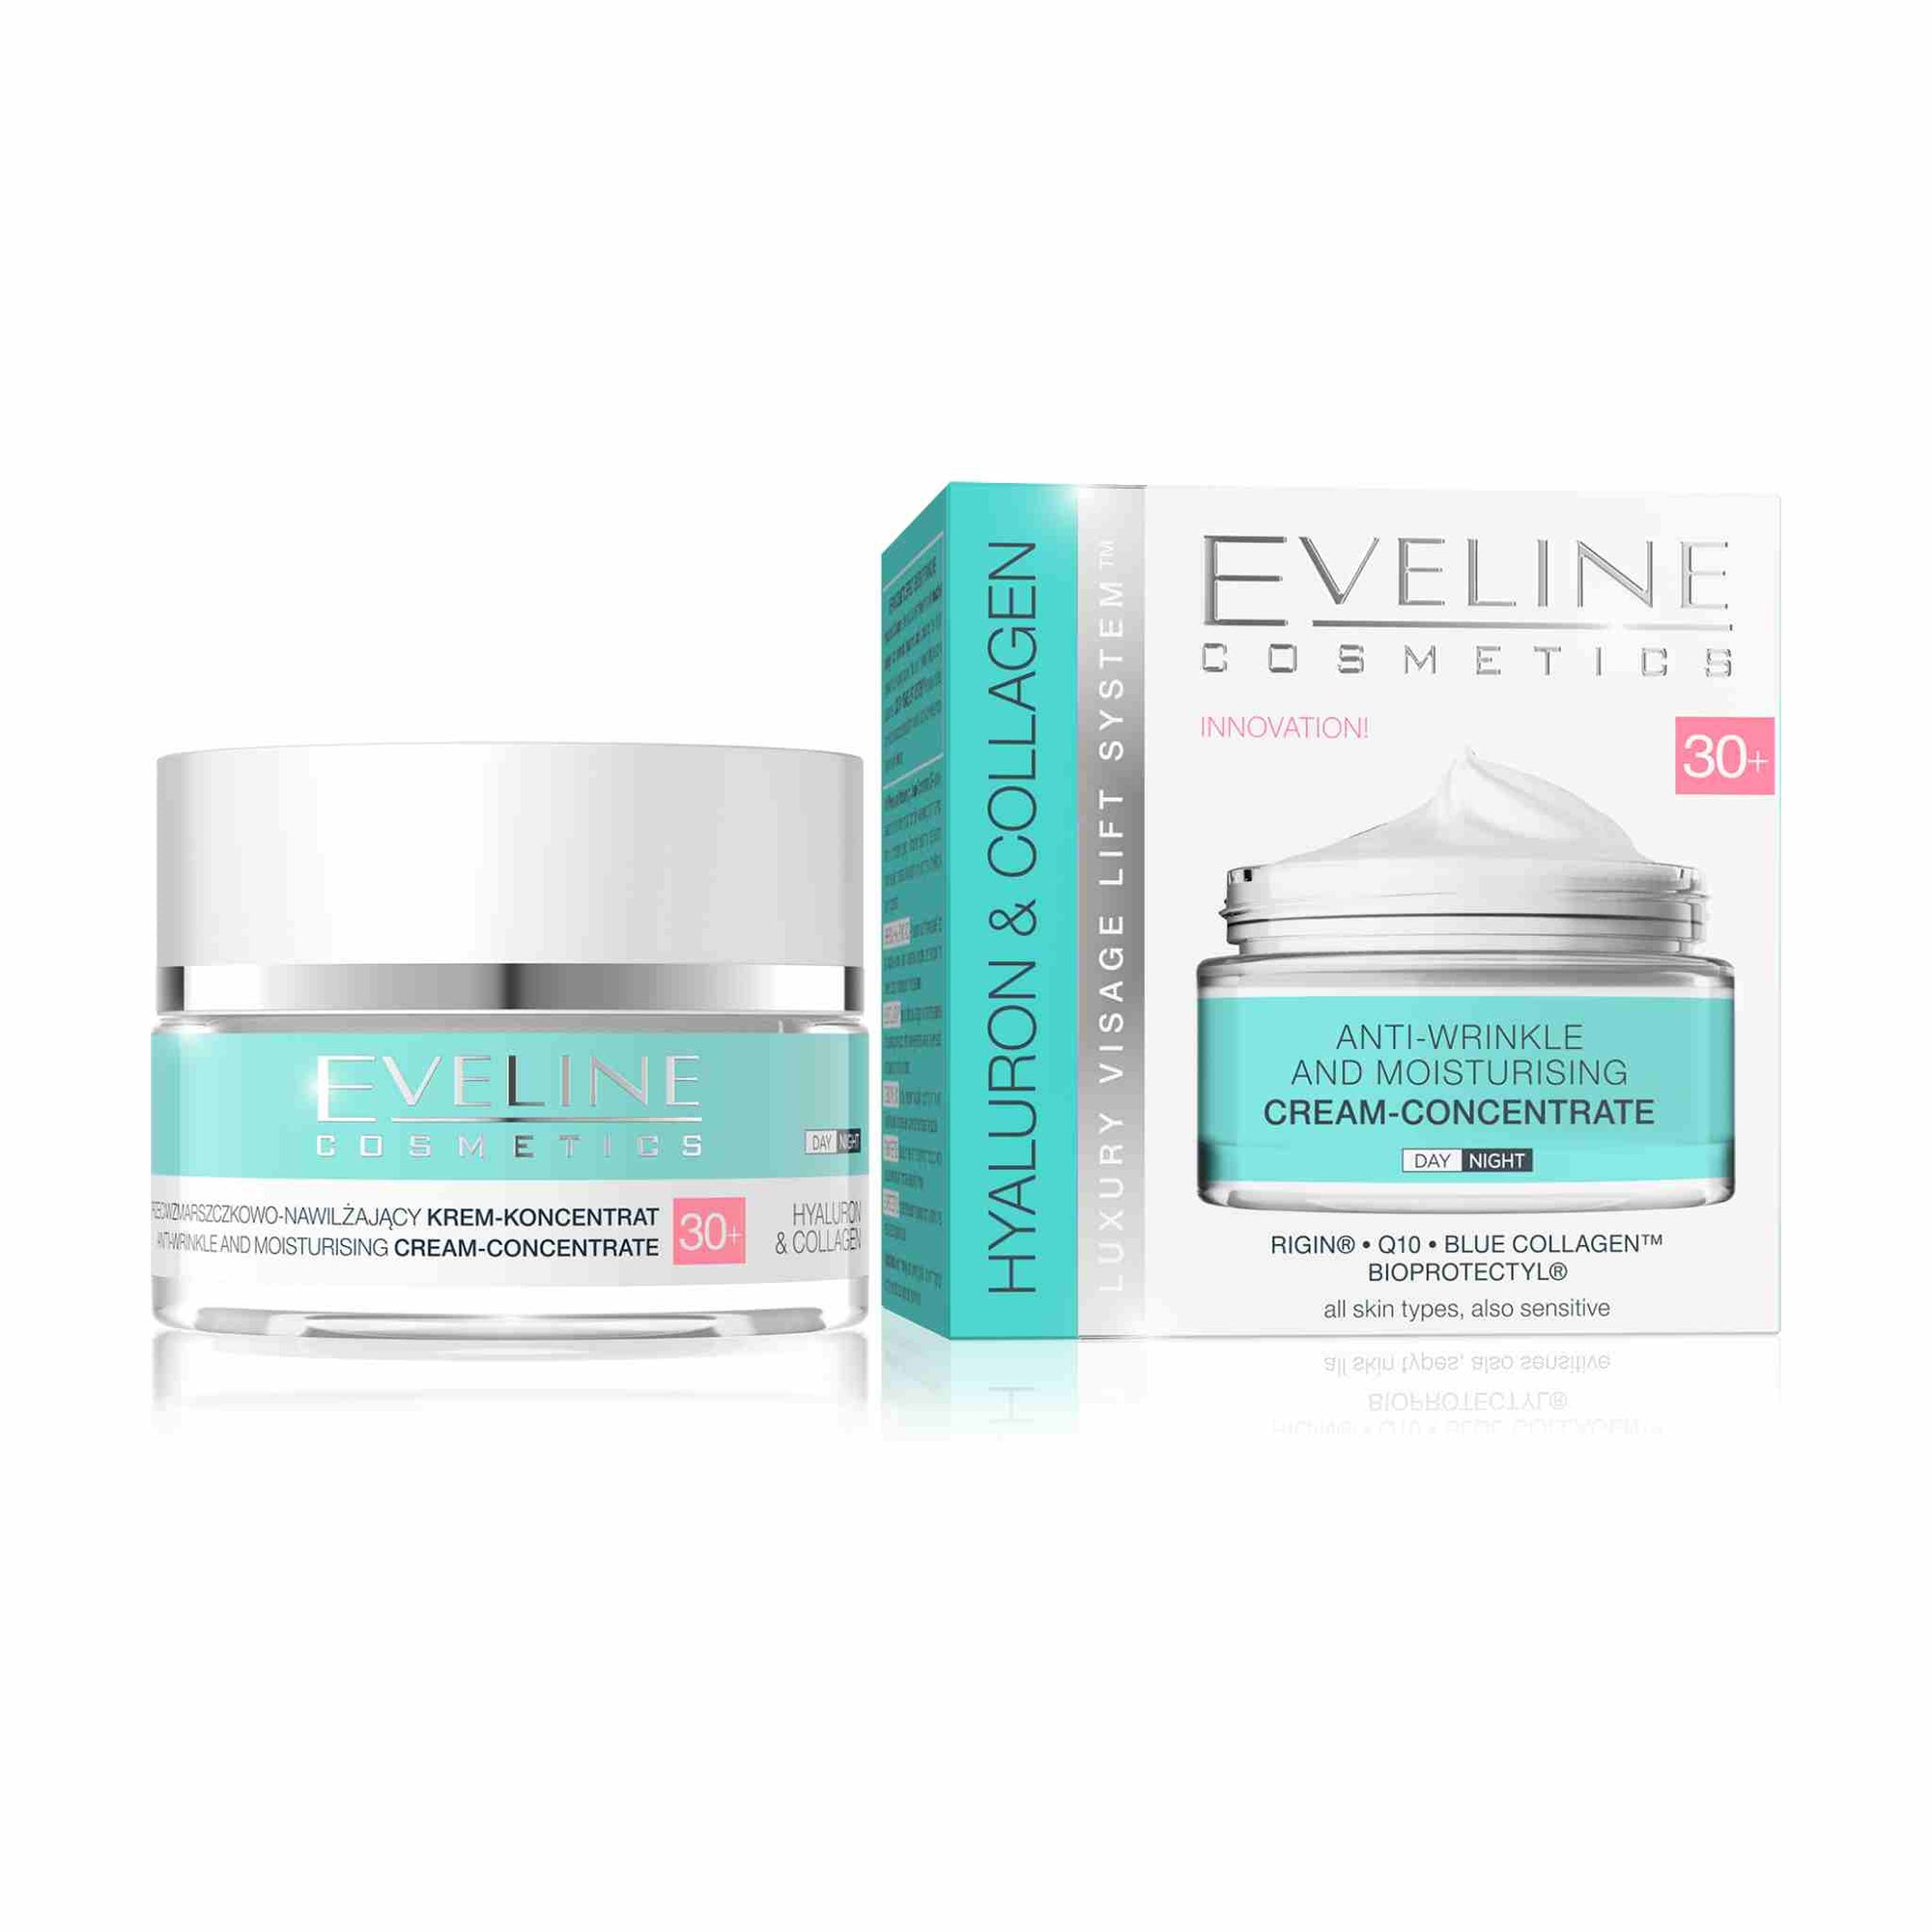 Hyaluron and Collagen Anti-Wrinkle and Moisturizing Day and Night Cream with Luxury Visage Lift System 30+